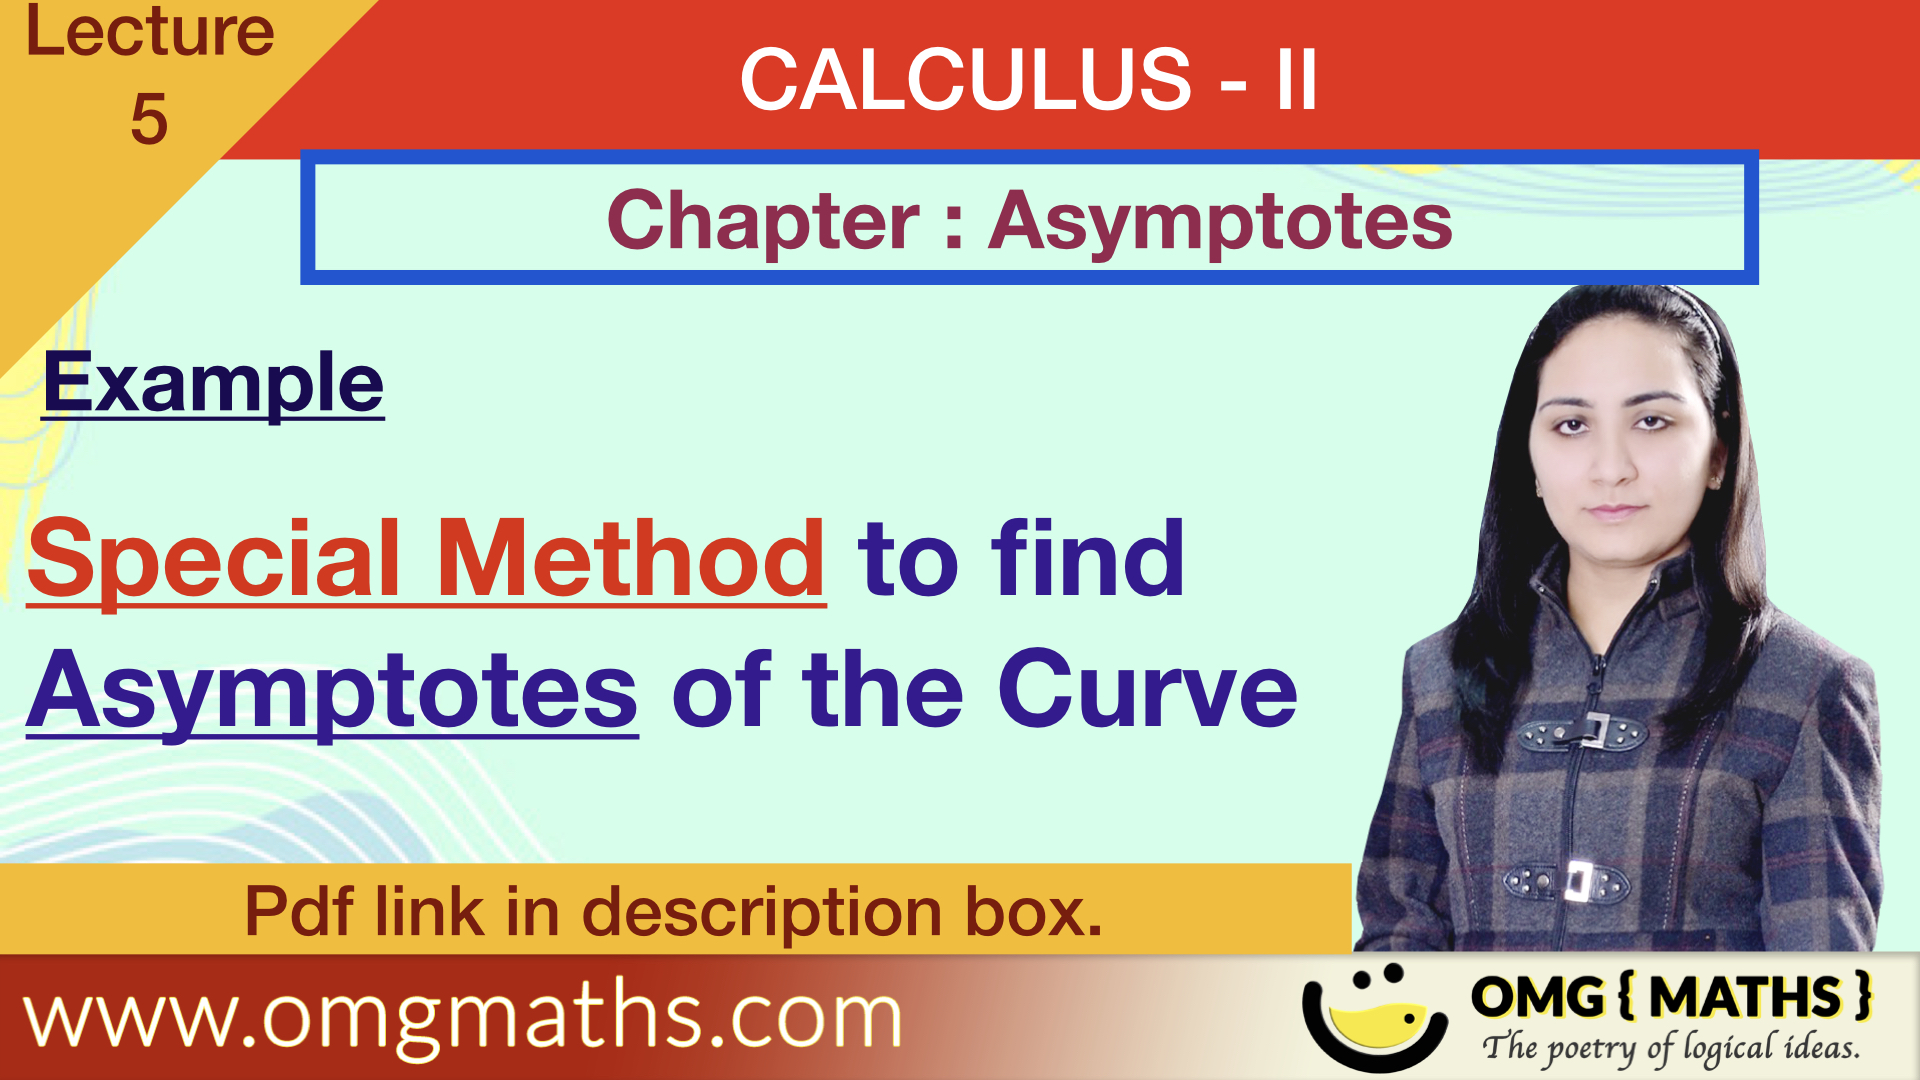 Special method to find asymptotes of the curve | Asymptotes | Calculus 2 | Bsc